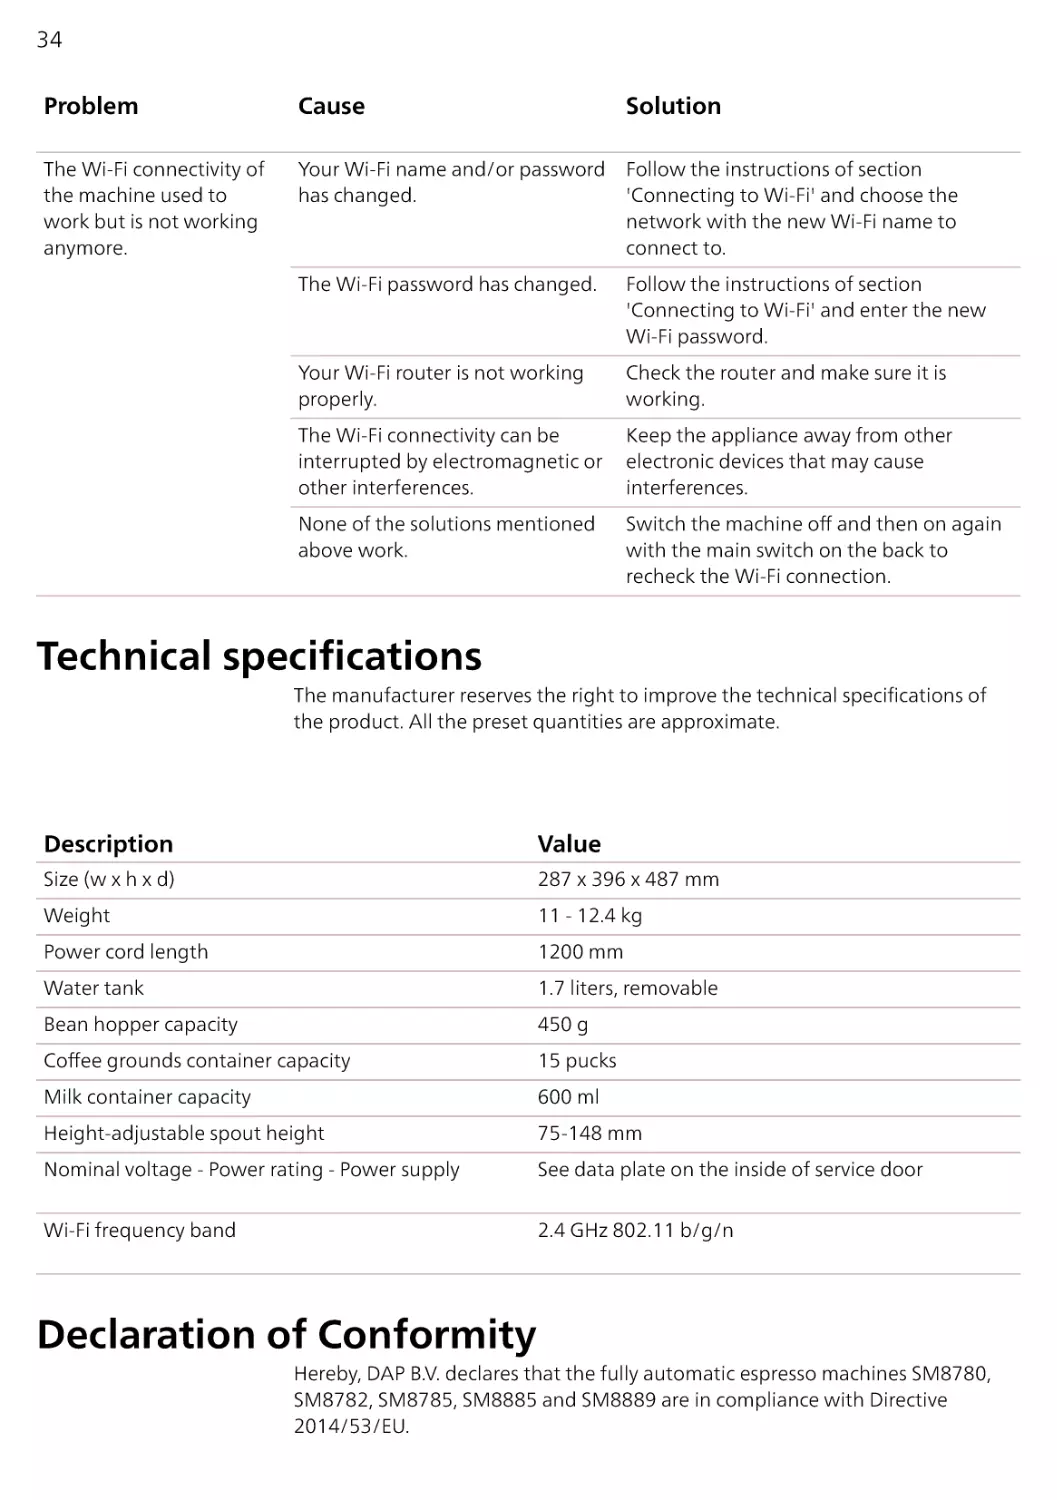 Technical specifications
Declaration of Conformity